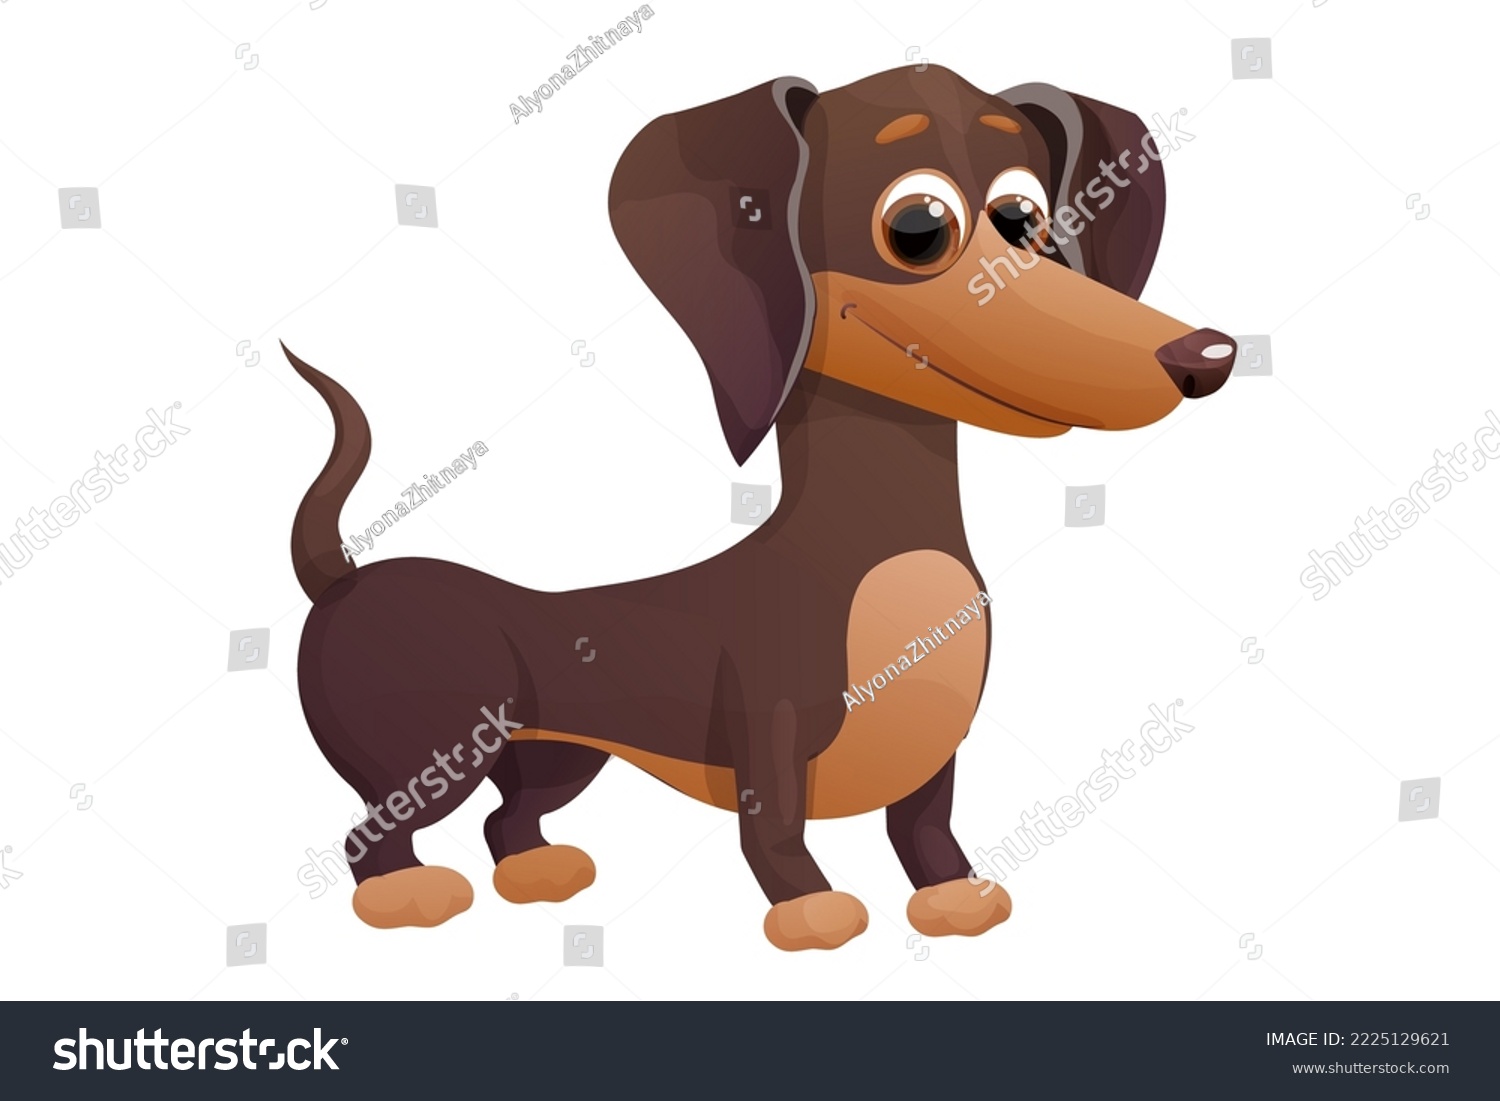 SVG of Cute dachshund puppy, standing and smiling in cartoon style, bright pet character isolated on white background. svg